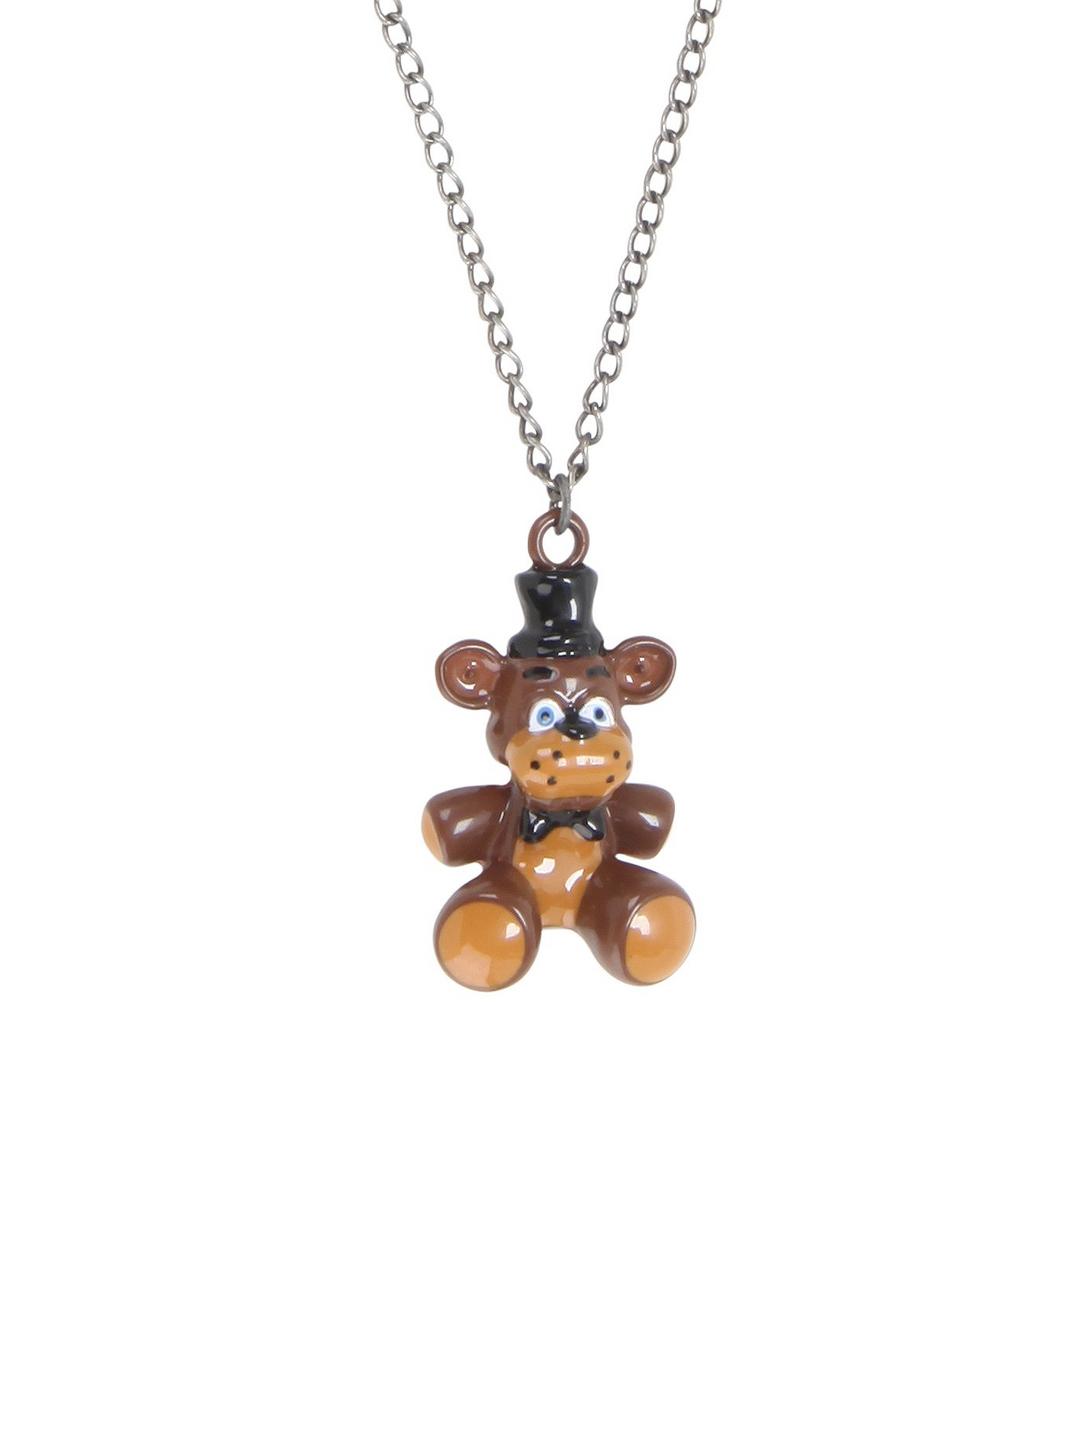 Hot Topic Macomb Mall on Instagram: Come get all your FNAF jewelry for the  movie !!!!! All jewelry and accessories BOGO 50% off !!!!!  #fivenightsatfreddys #freddyfazbear #fnaf